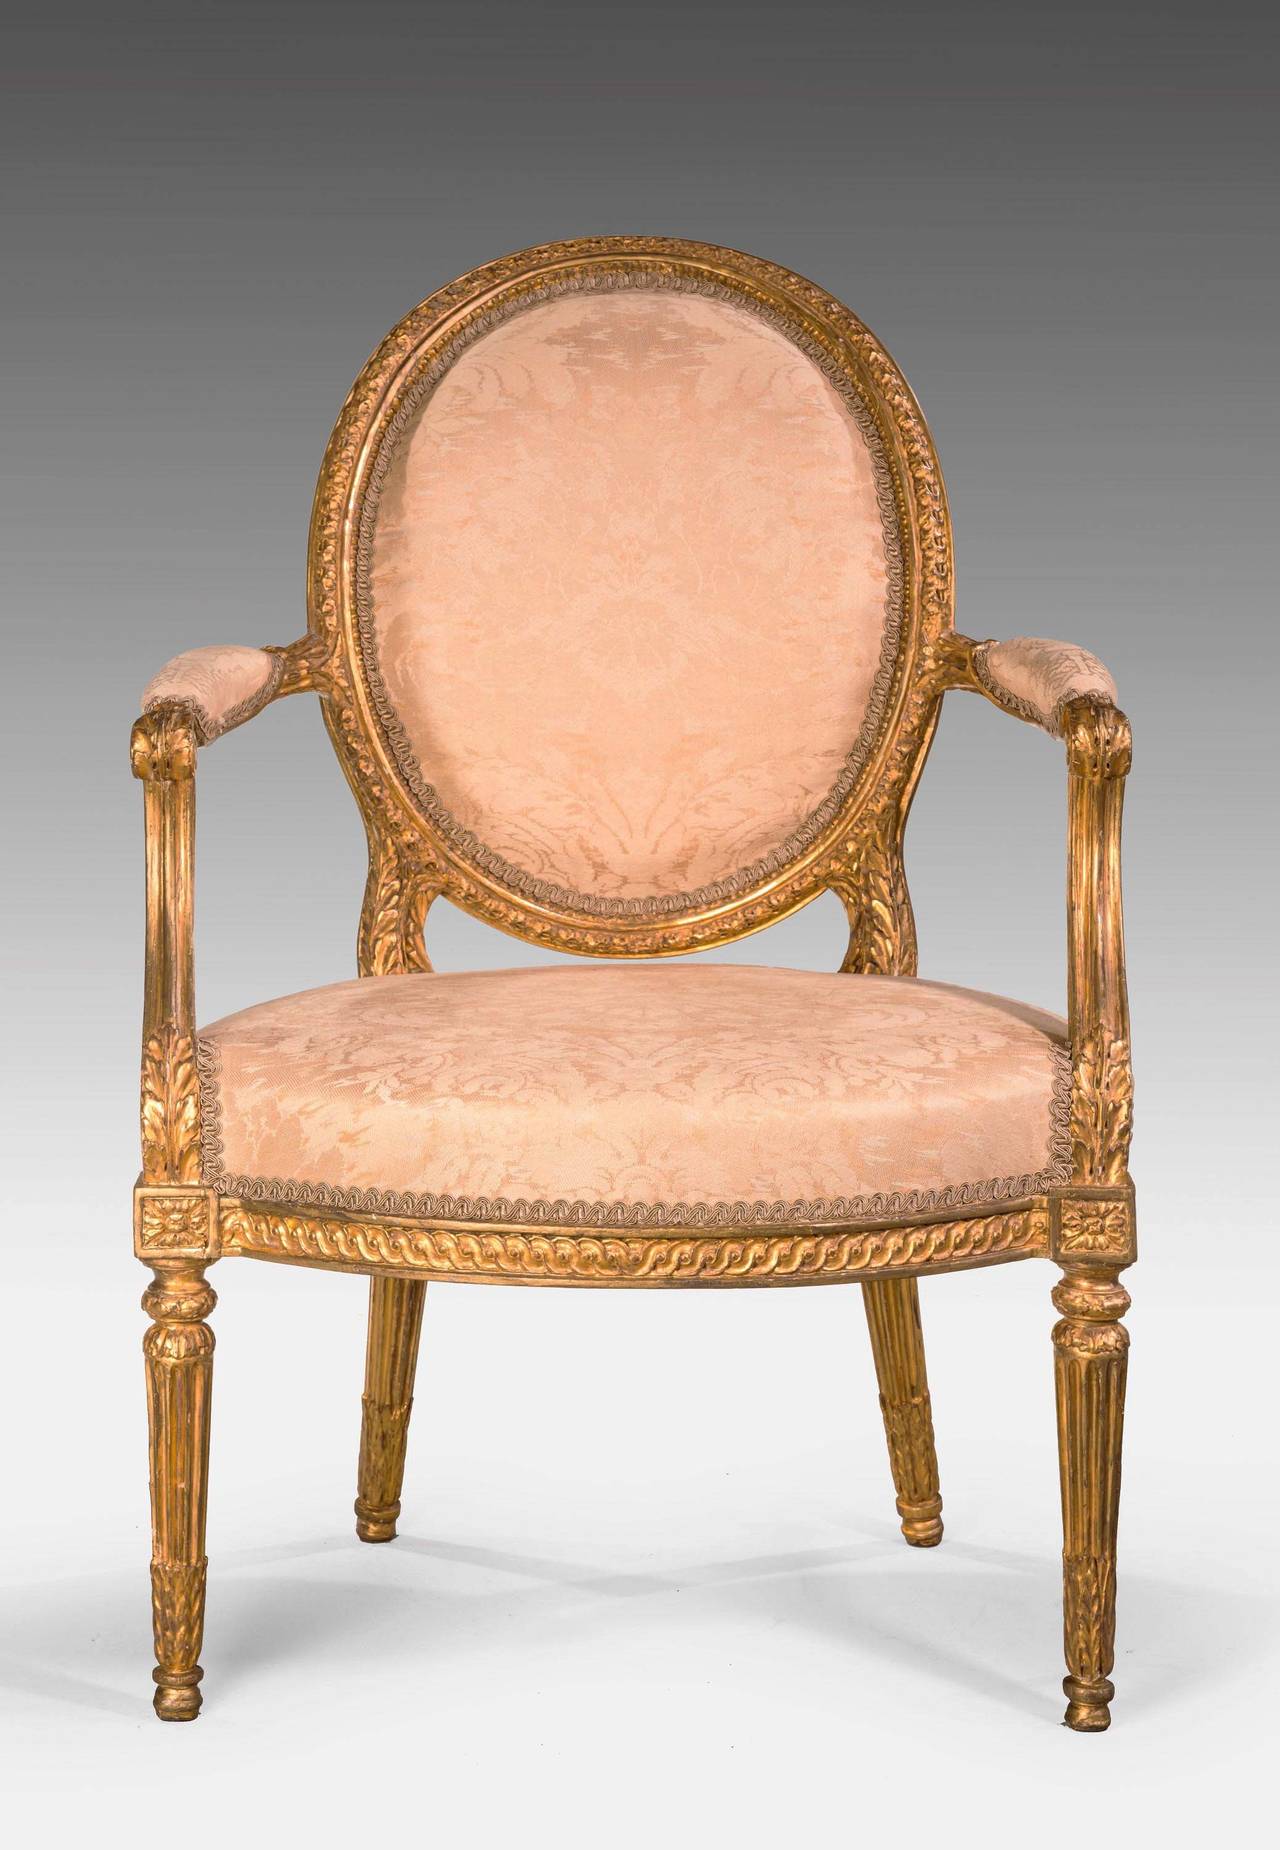 A very beautifully carved late 18th century giltwood armchair. The oval back with continuous finely executed work. Back support with scroll work and largely original gilding.

 This chair holds the plaque of C. Maller and Company,